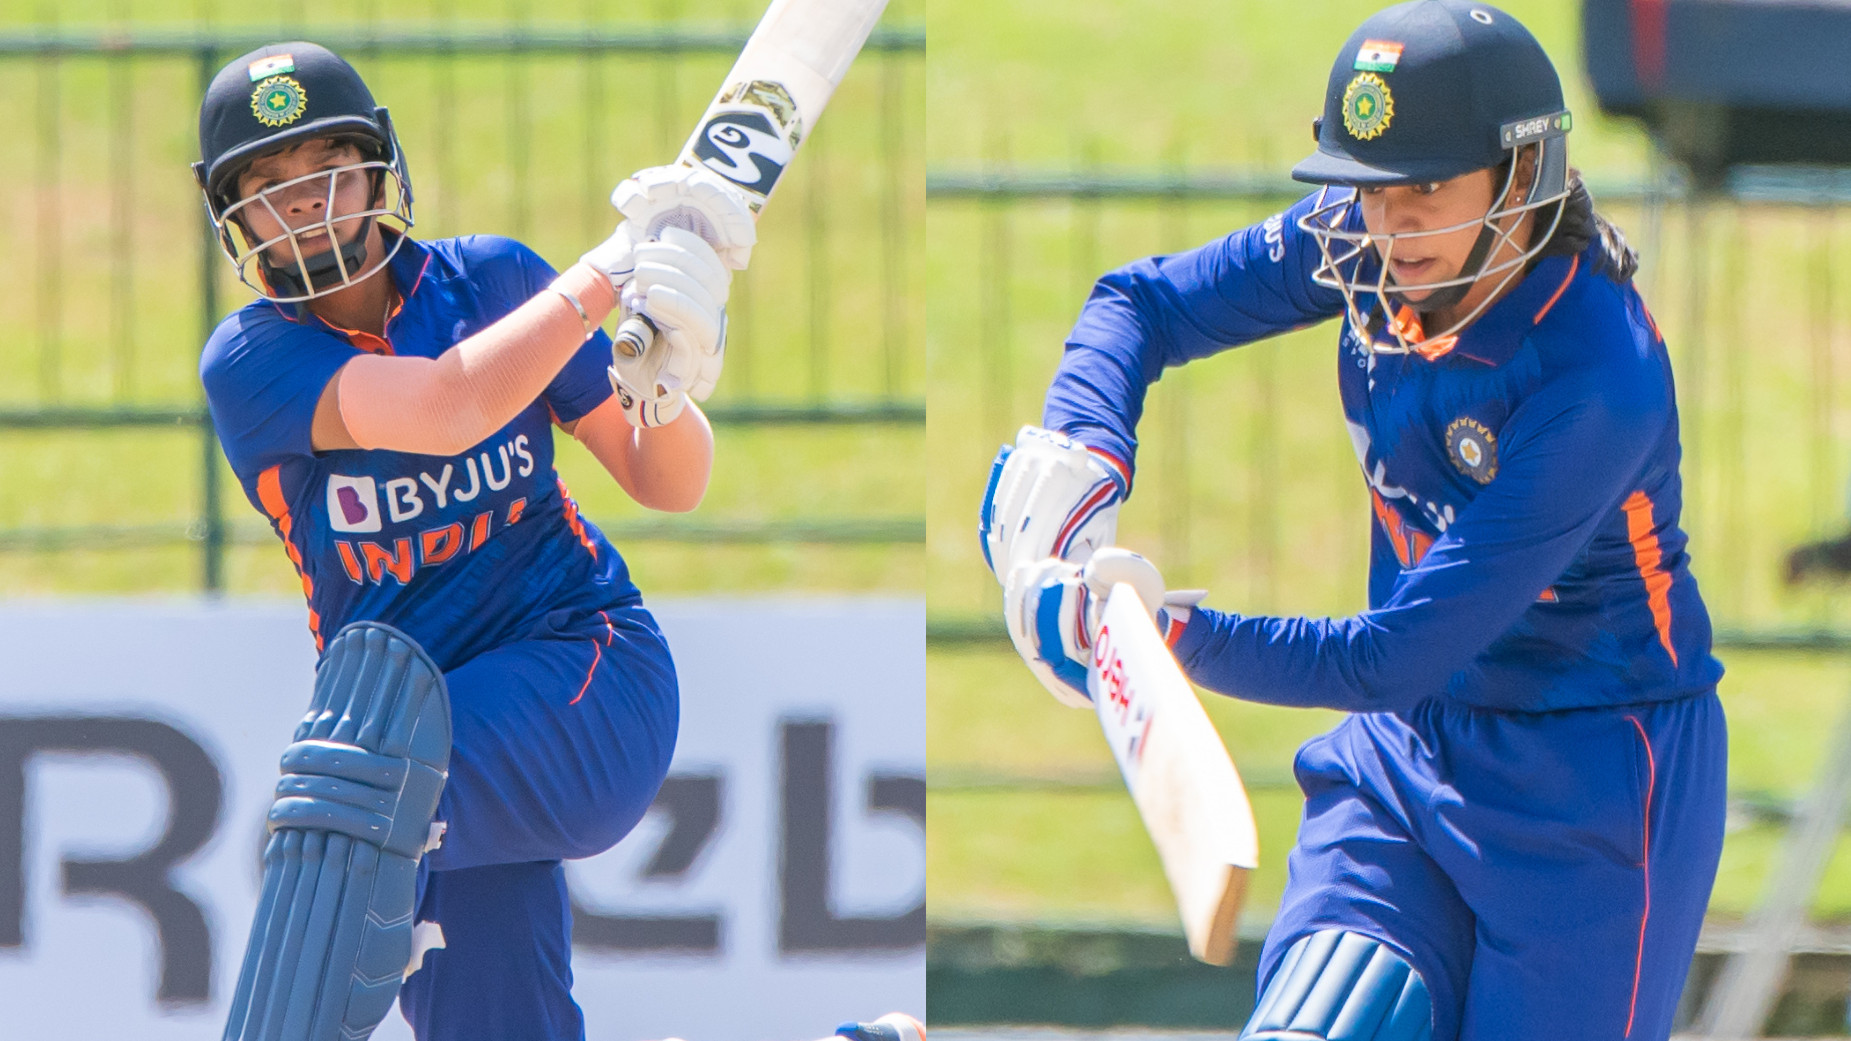 SLW v INDW 2022: Smriti Mandhana's 94* and Shafali Verma's 71* hands India 10-wicket win in 2nd ODI, lead series 2-0